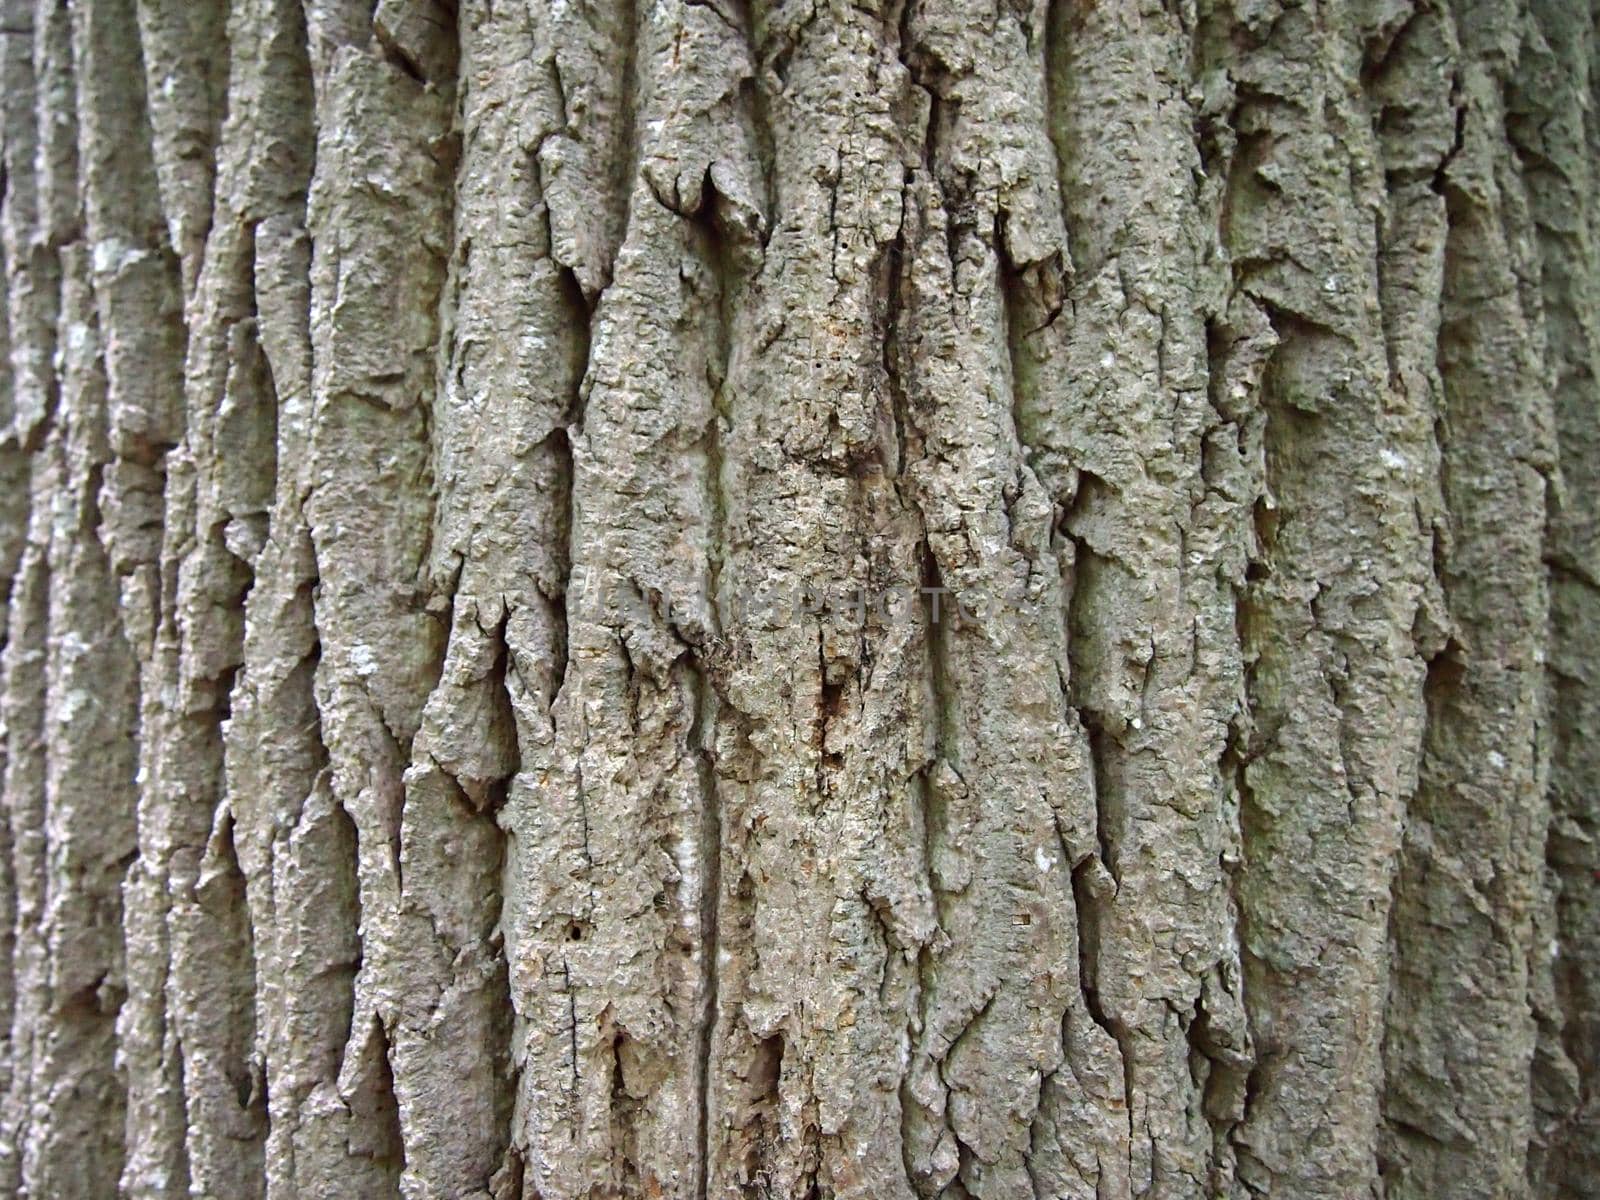 Gray Tree Bark Close-up textured pattern with lines going downwards.
